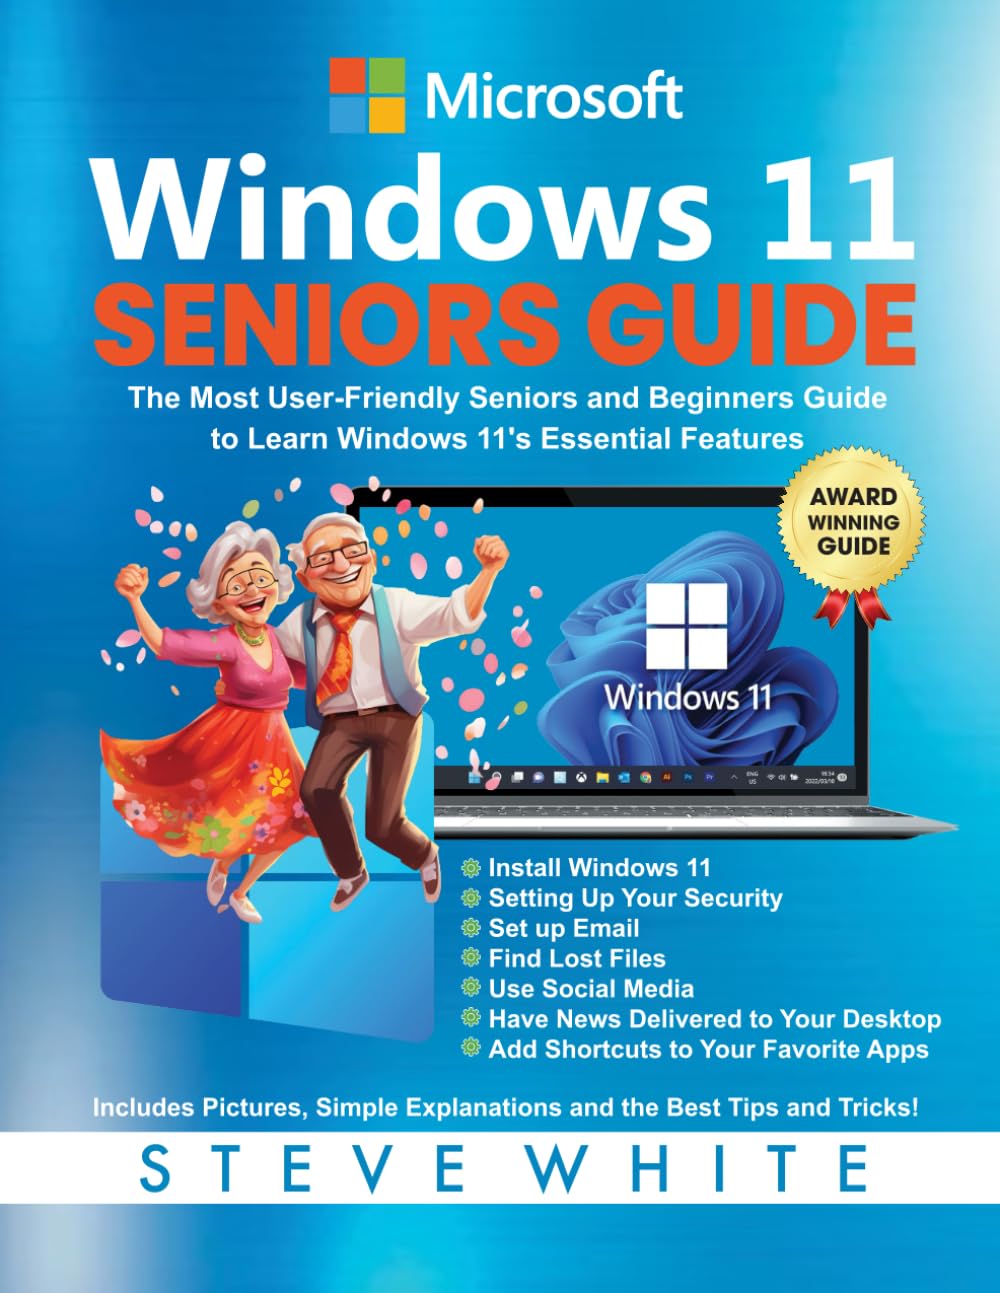 Windows 11 Seniors Guide: The Most User-Friendly Seniors and Beginners Guide to Learning Windows 11's Essential Features